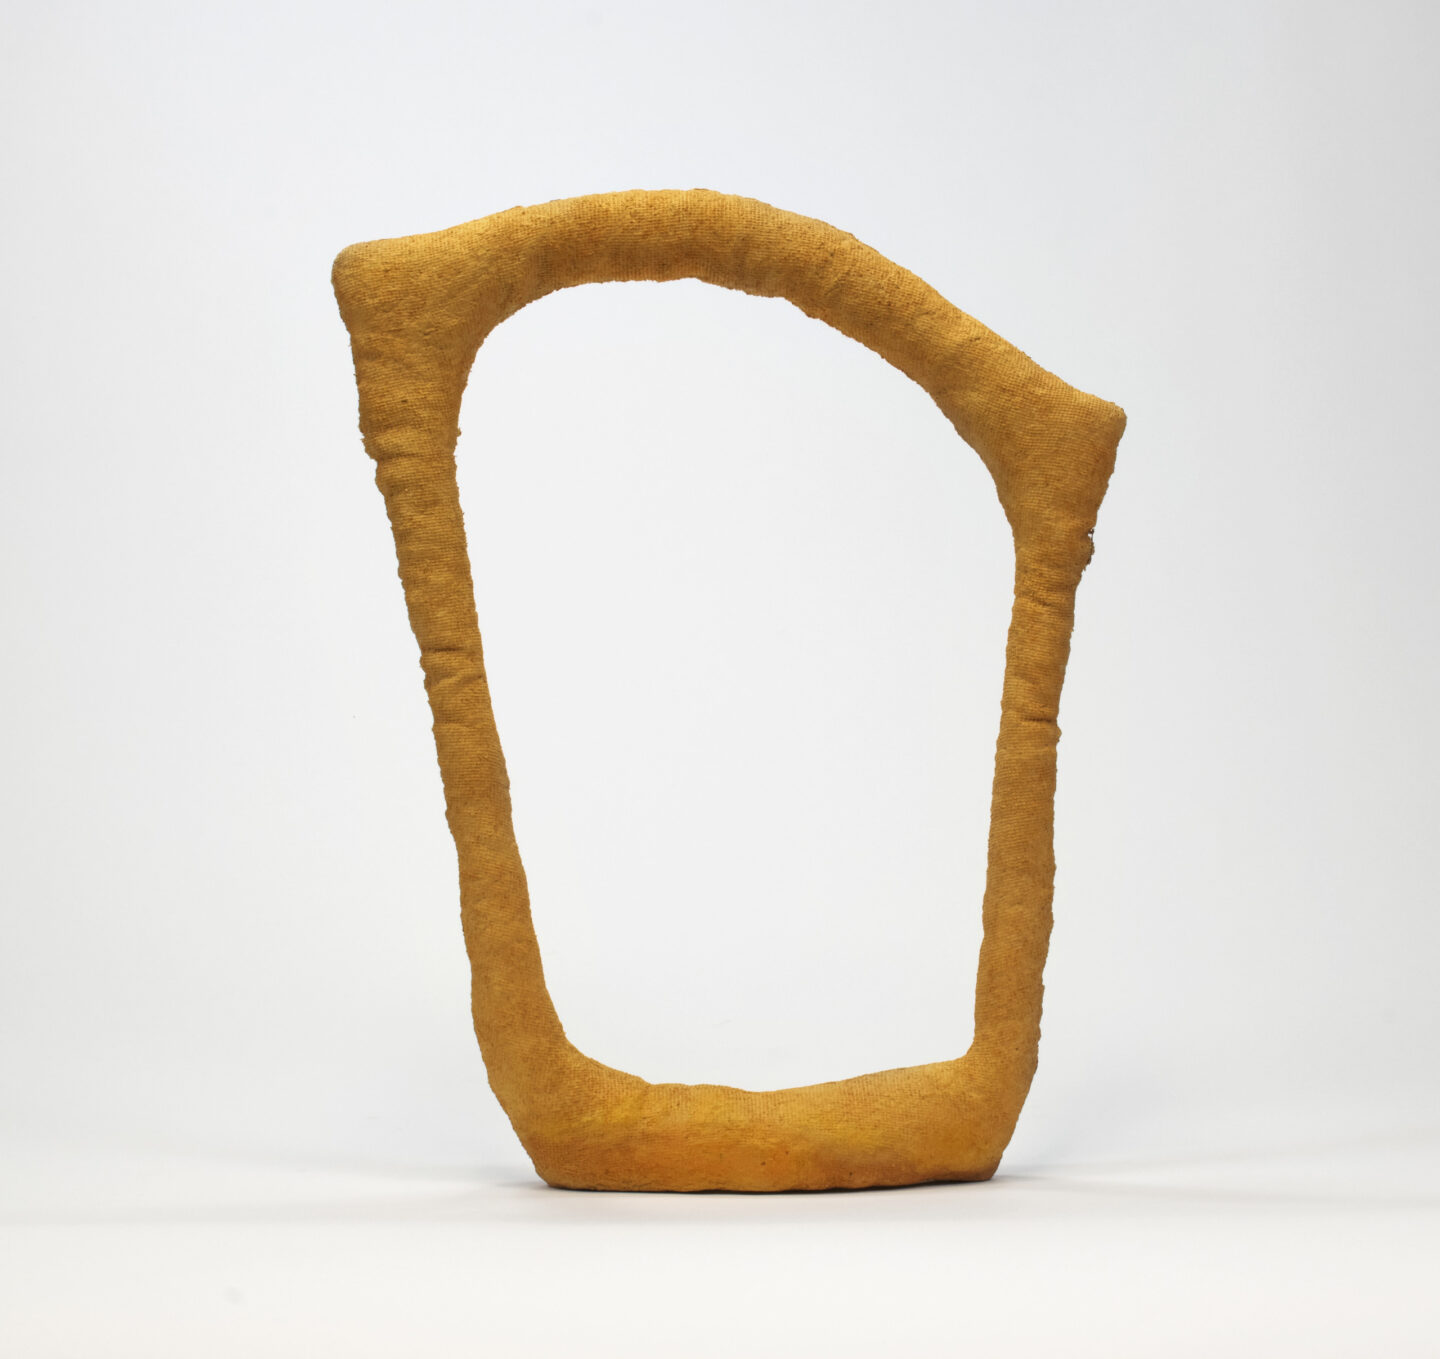 A trapezoidal abstract orange sculpture made of paper pulp with a top arch that connects the two sides. The sculpture is thin with a big void space in between the four sides.